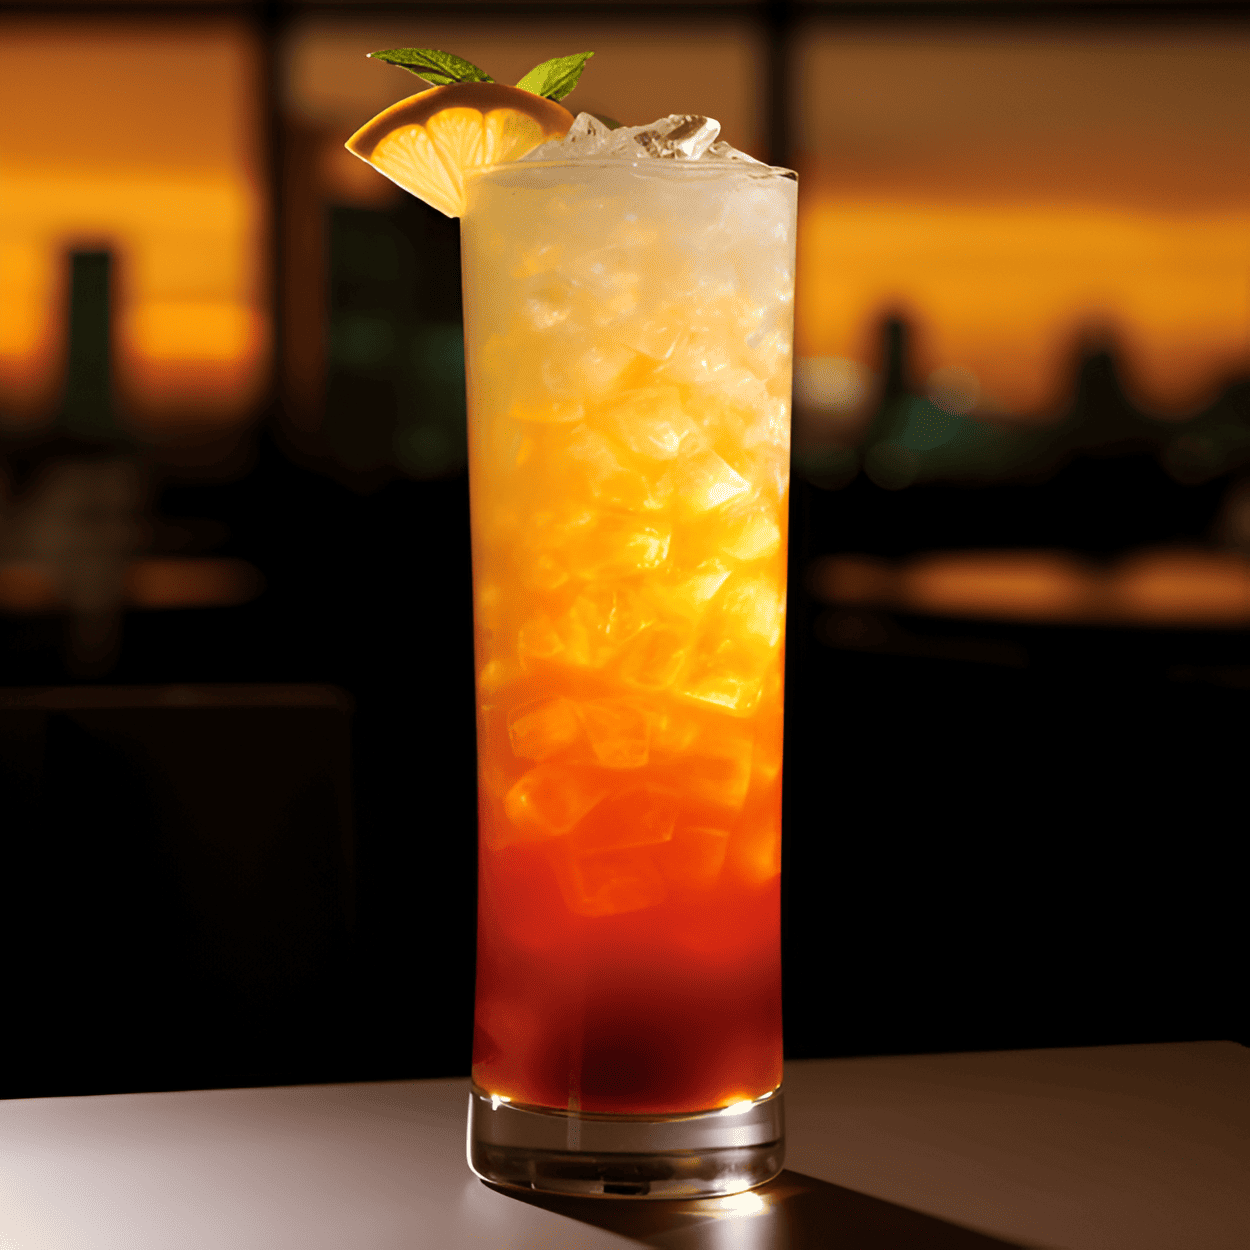 Bermuda Rum Swizzle Cocktail Recipe - The Bermuda Rum Swizzle has a well-balanced, fruity, and refreshing taste. It is sweet and tangy with a hint of spice, and has a smooth, medium-bodied texture. The combination of rum, fruit juices, and bitters creates a complex and satisfying flavor profile.